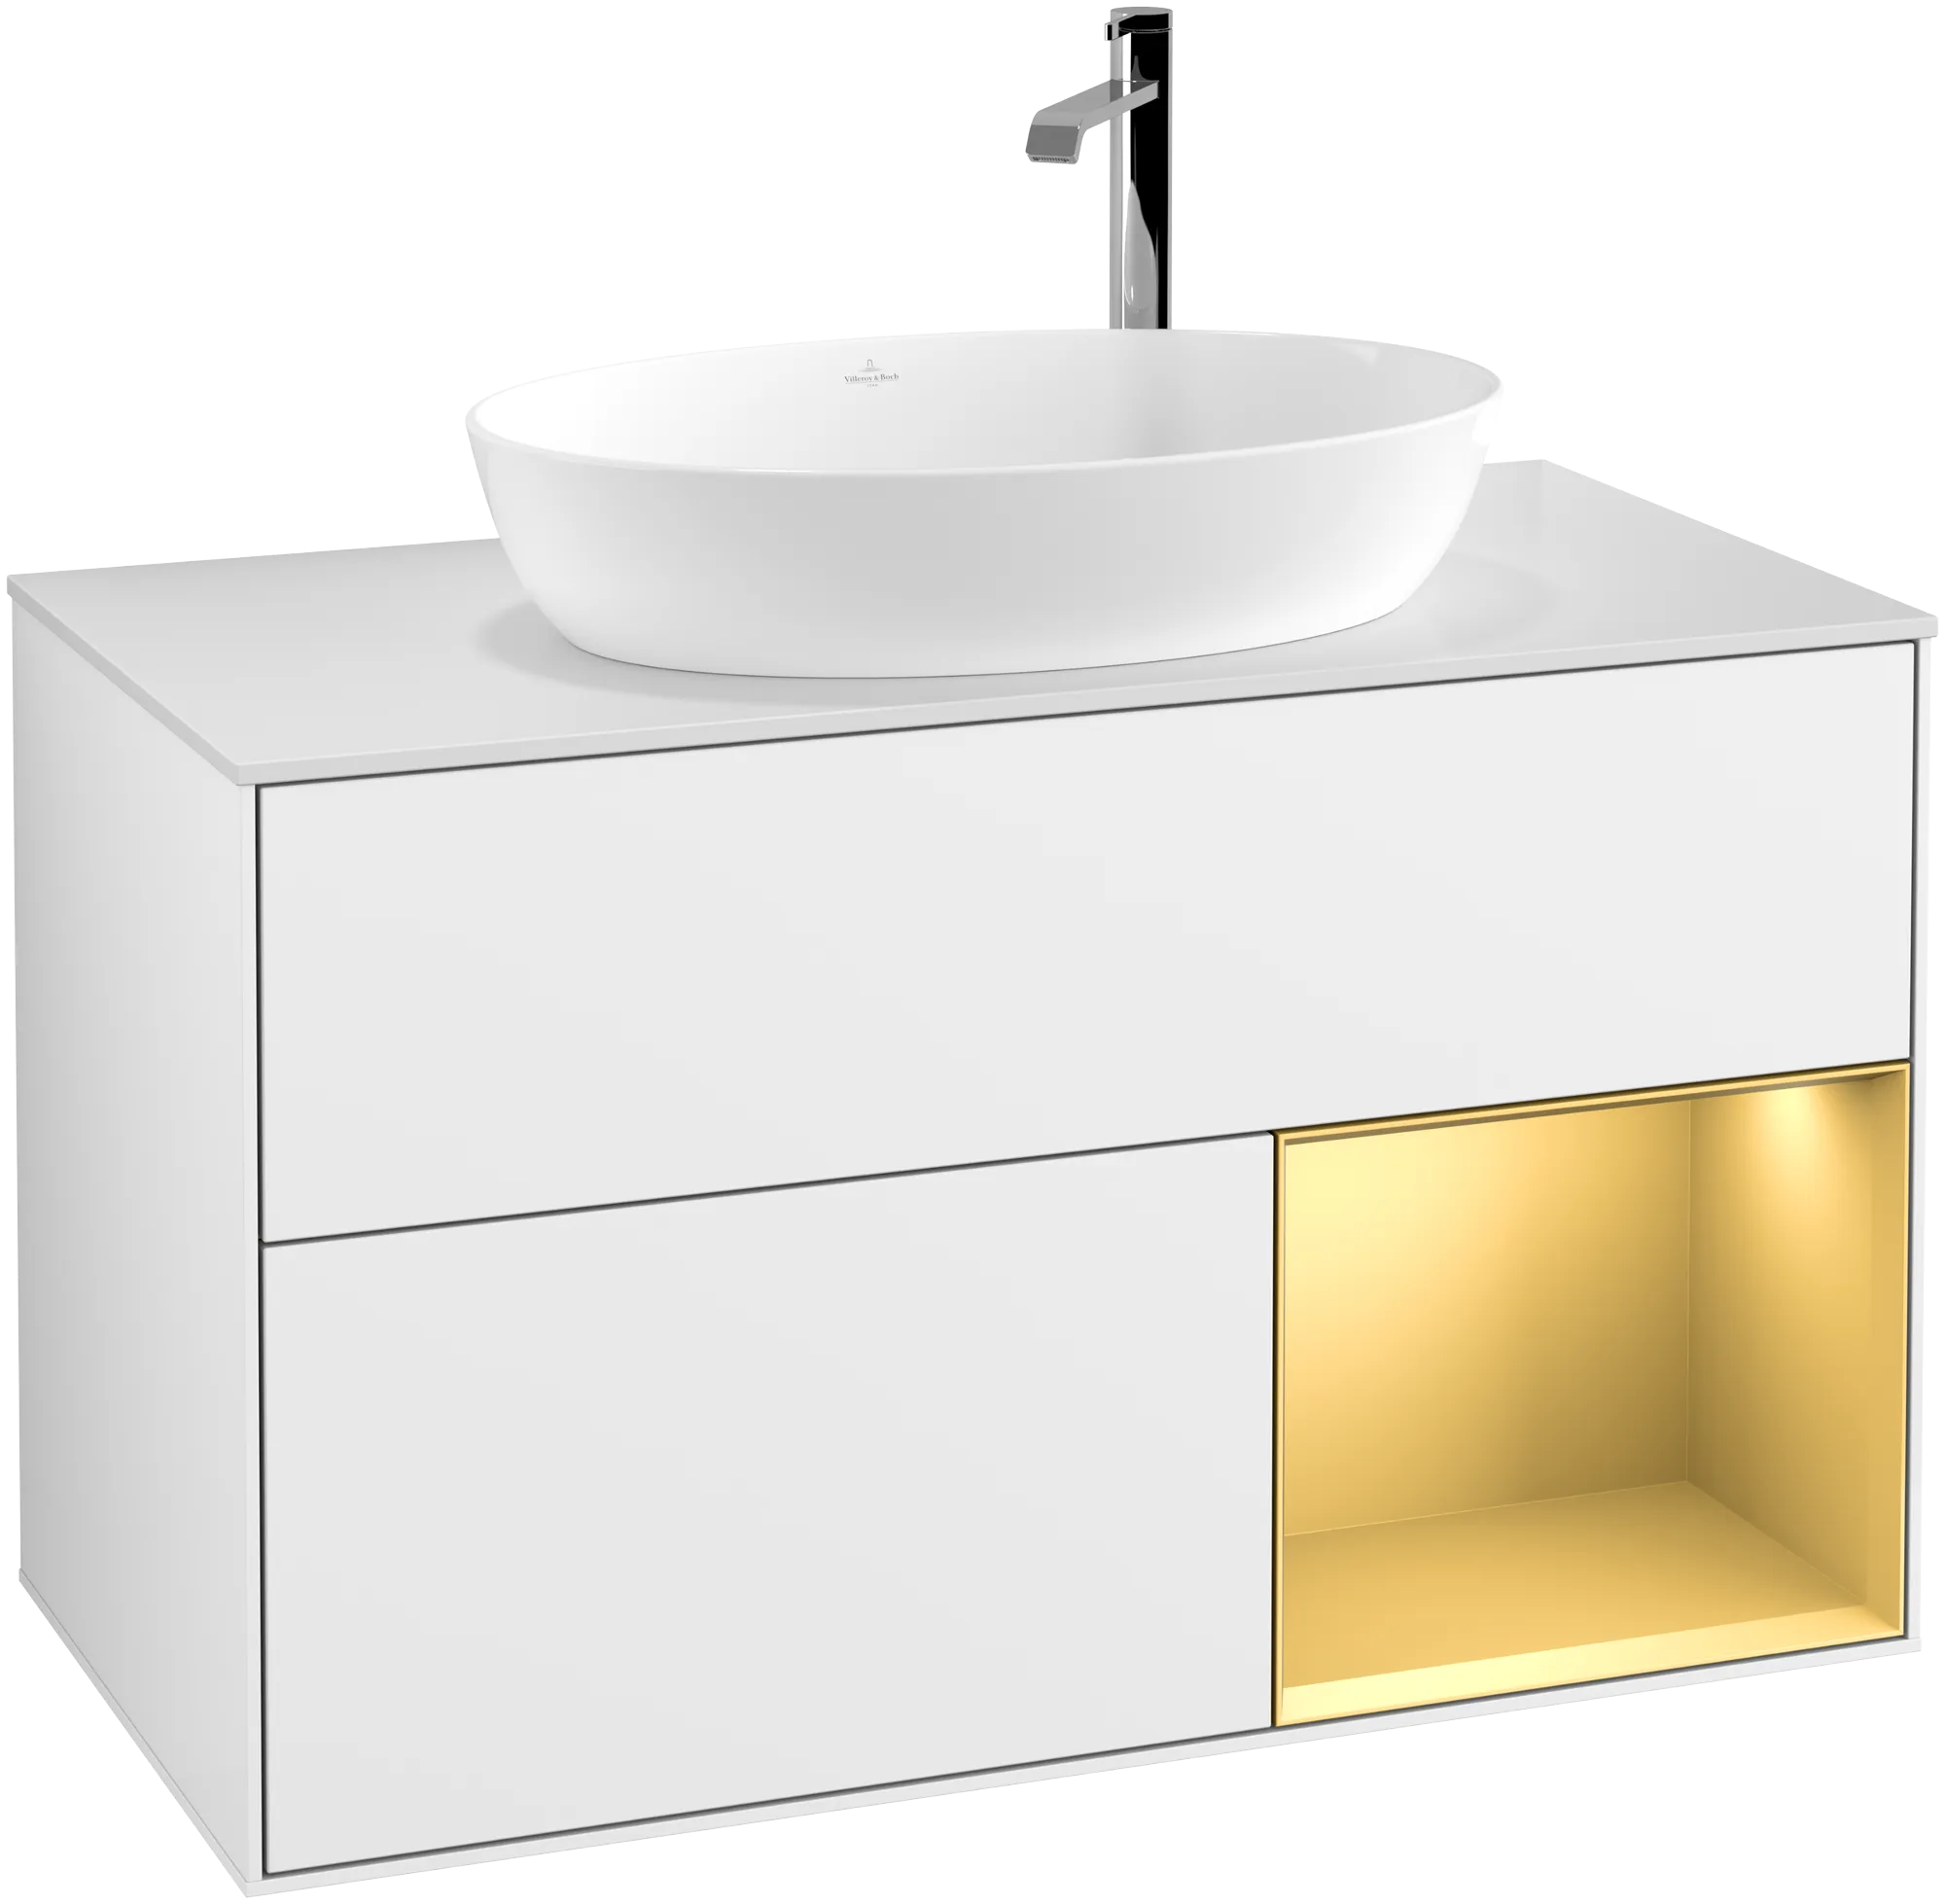 Зображення з  VILLEROY BOCH Finion Vanity unit, with lighting, 2 pull-out compartments, 1000 x 603 x 501 mm, Glossy White Lacquer / Gold Matt Lacquer / Glass White Matt #G901HFGF